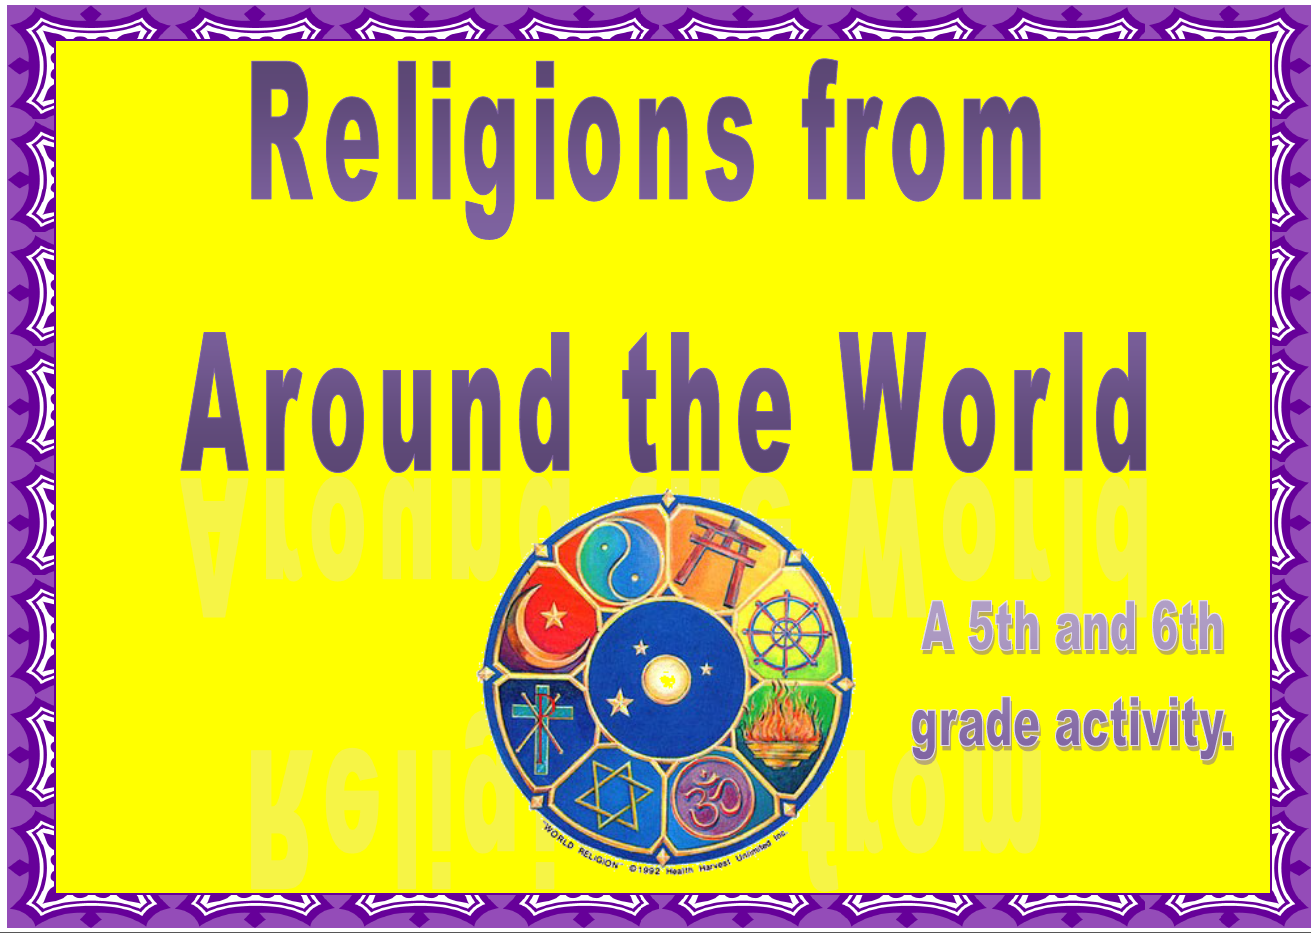 Religions from Around the World - Research Templates